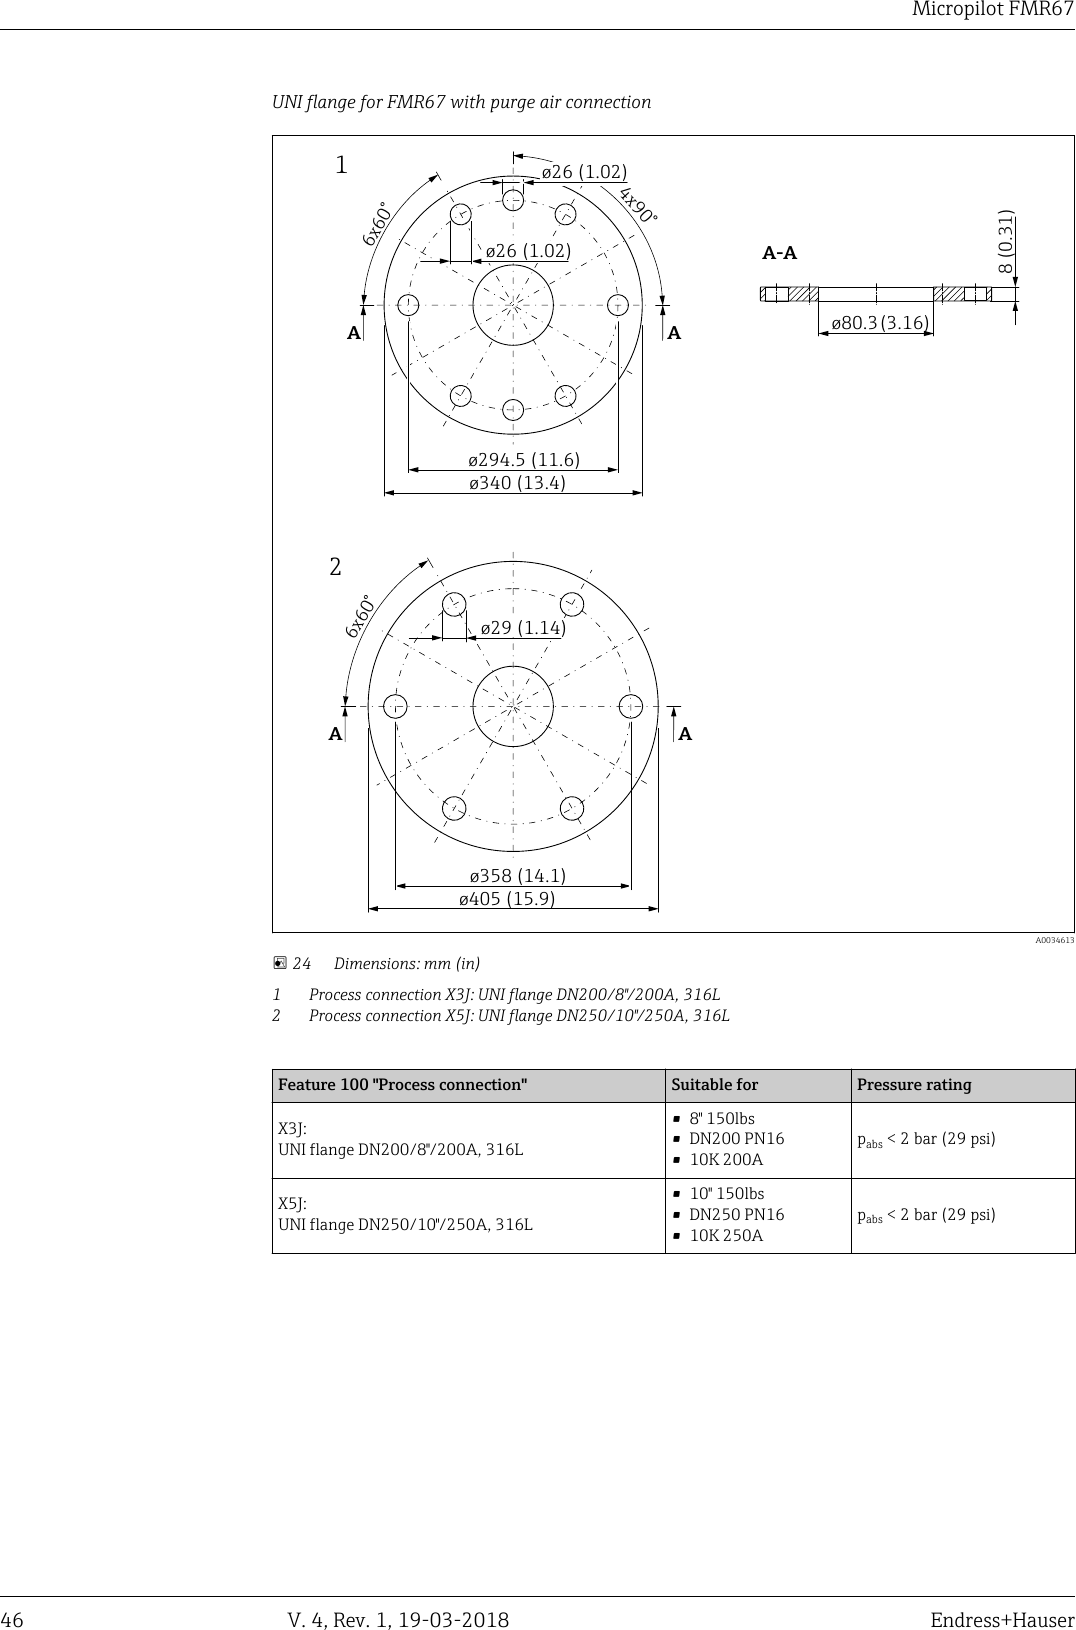 DRAFT DRAFT   DRAFT   DRAFT   DRAFT   DRAFT   DRAFTDRAFT   DRAFT   DRAFTMicropilot FMR6746 V. 4, Rev. 1, 19-03-2018 Endress+HauserUNI flange for FMR67 with purge air connectionAAAA12ø405 (15.9)6x60°ø29 (1.14)ø358 (14.1)ø340 (13.4)4x90°6x60°ø26 (1.02)ø26 (1.02)ø294.5 (11.6)A-A8 (0.31)ø80.3(3.16)  A0034613 24 Dimensions: mm (in)1 Process connection X3J: UNI flange DN200/8&quot;/200A, 316L2 Process connection X5J: UNI flange DN250/10&quot;/250A, 316LFeature 100 &quot;Process connection&quot; Suitable for Pressure ratingX3J:UNI flange DN200/8&quot;/200A, 316L• 8&quot; 150lbs• DN200 PN16• 10K 200Apabs &lt; 2 bar (29 psi)X5J:UNI flange DN250/10&quot;/250A, 316L• 10&quot; 150lbs• DN250 PN16• 10K 250Apabs &lt; 2 bar (29 psi)